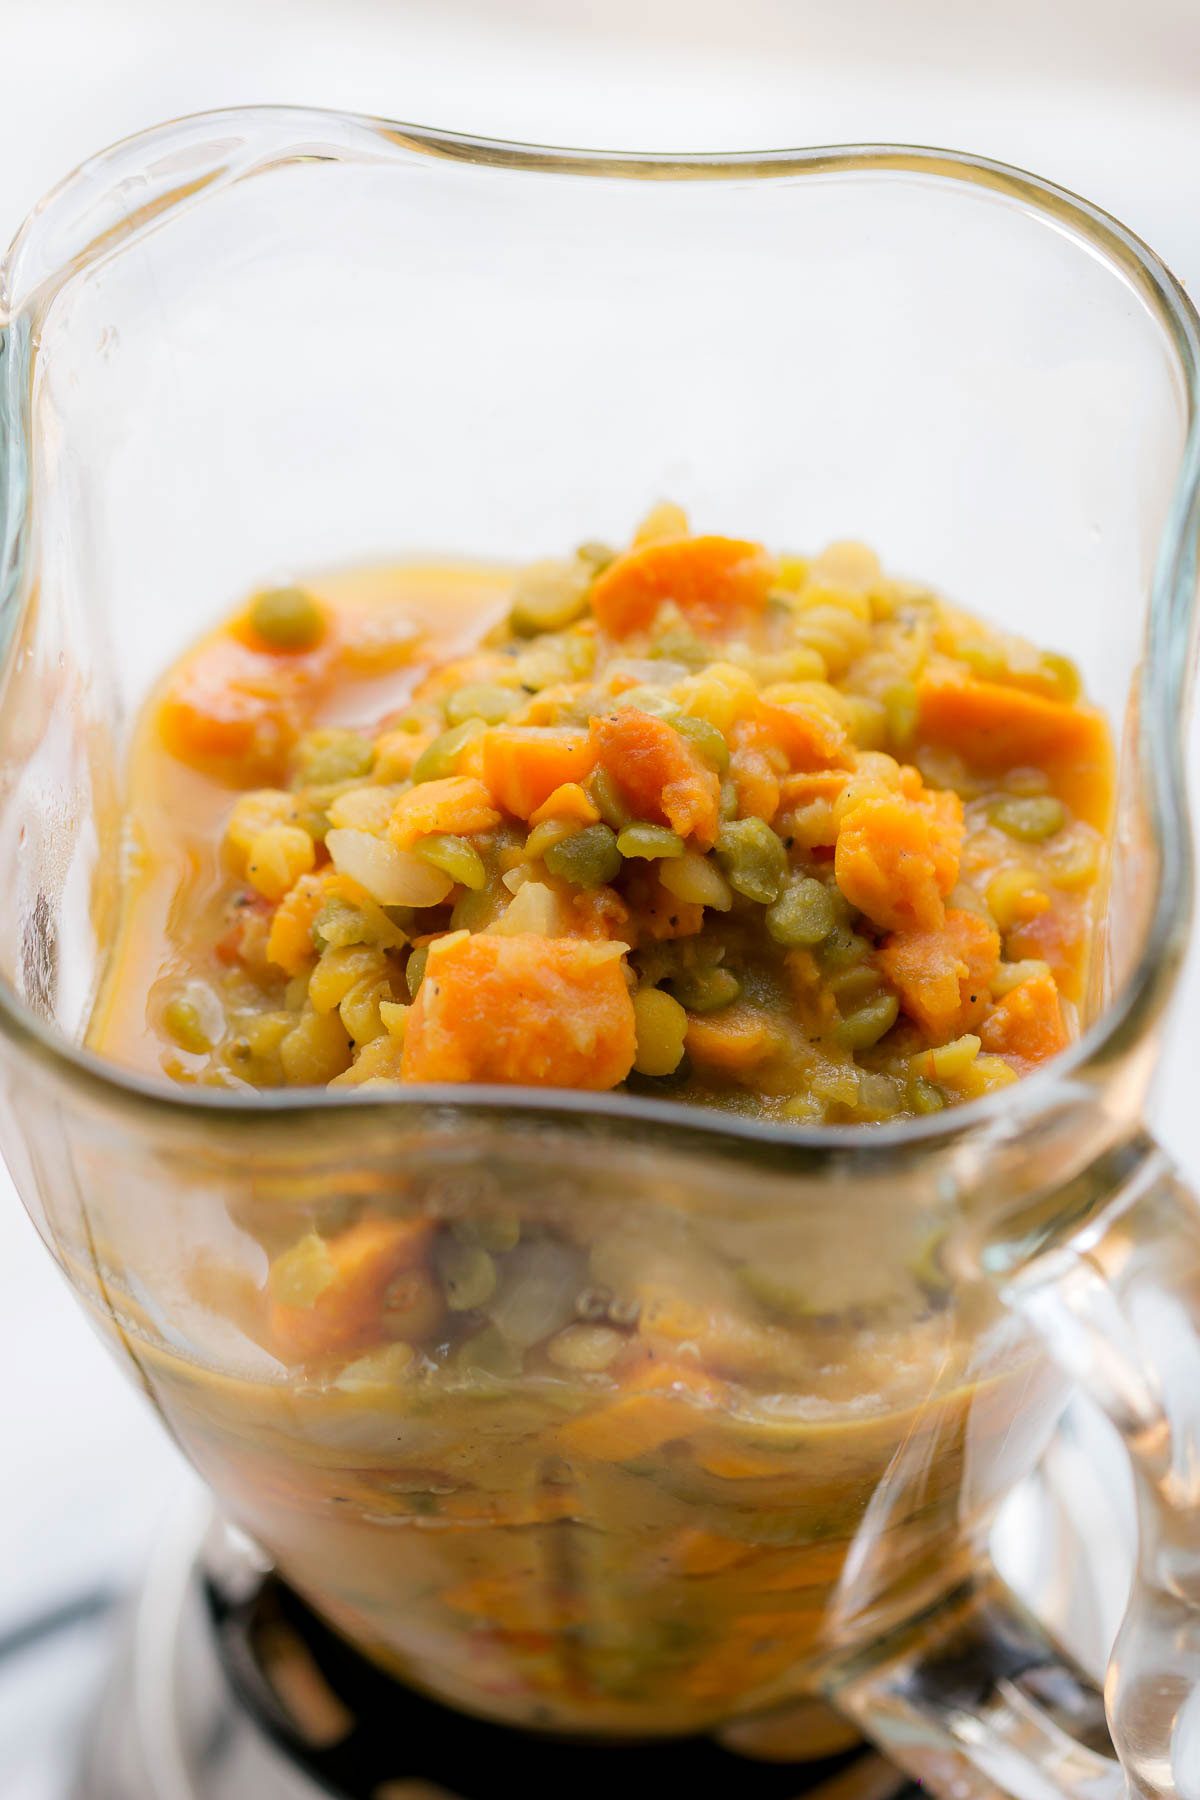 Split Pea Soup with Sweet Potato - Fiber-loaded and packed with flavor, this creamy split pea soup is a comforting vegetarian meal for chilly winter nights